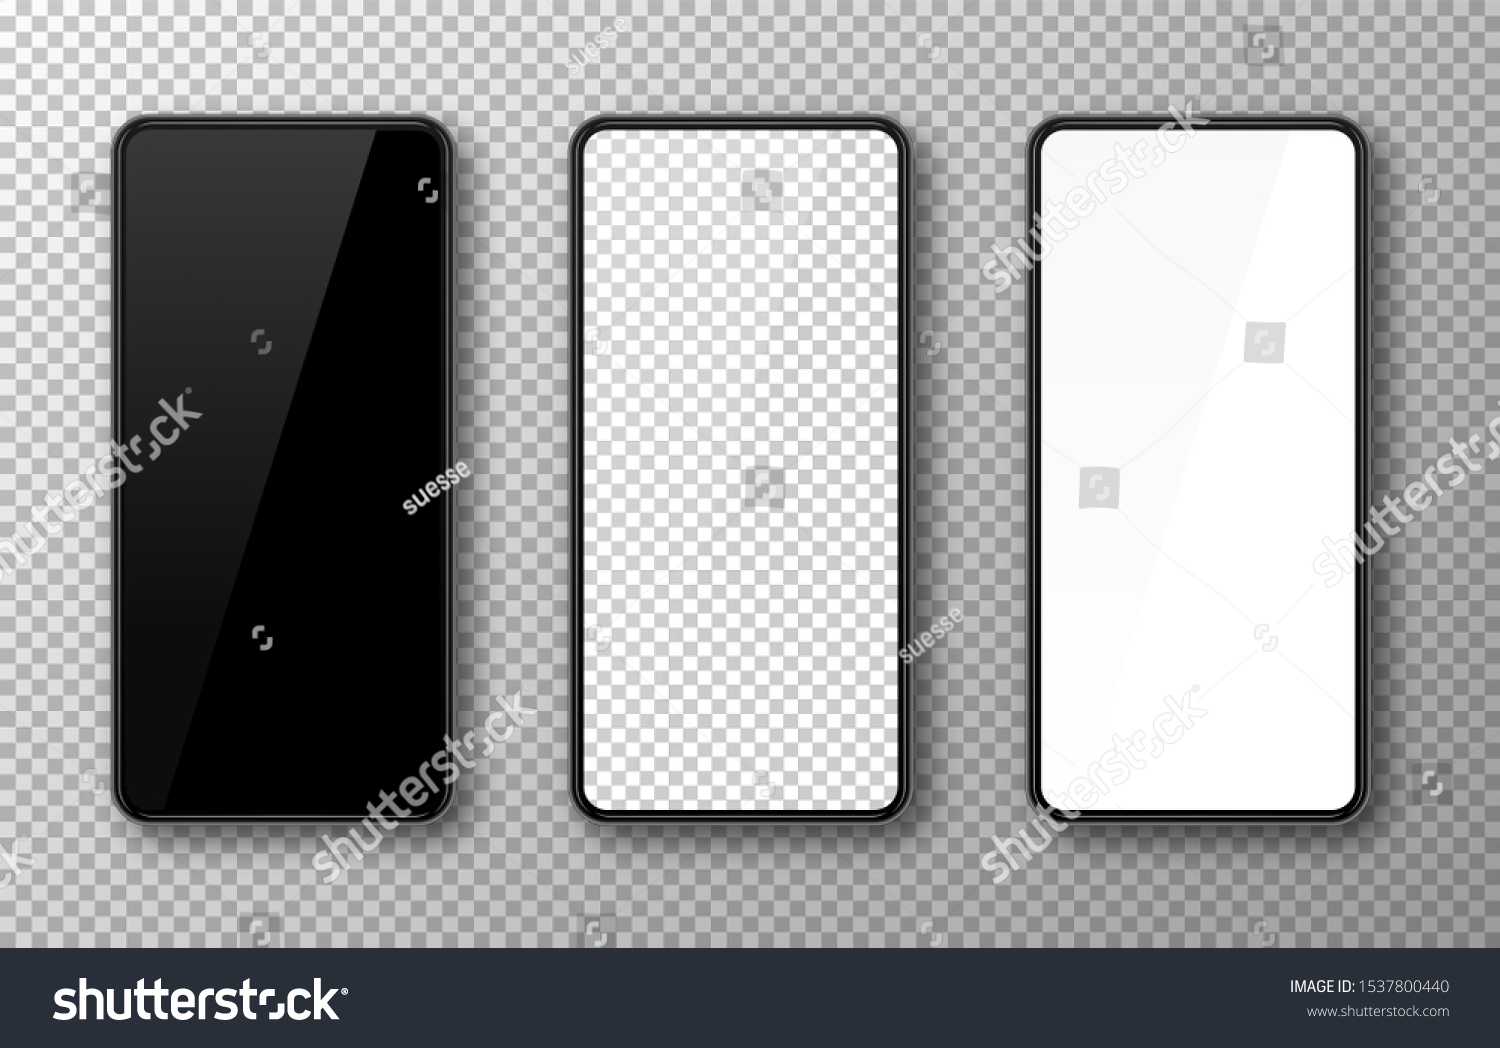 Realistic smartphone mockup set. Mobile phone blank, white, transparent screen design. Modern digital device template. Cellphone display front view mock up. Black frame. Isolated vector illustration #1537800440